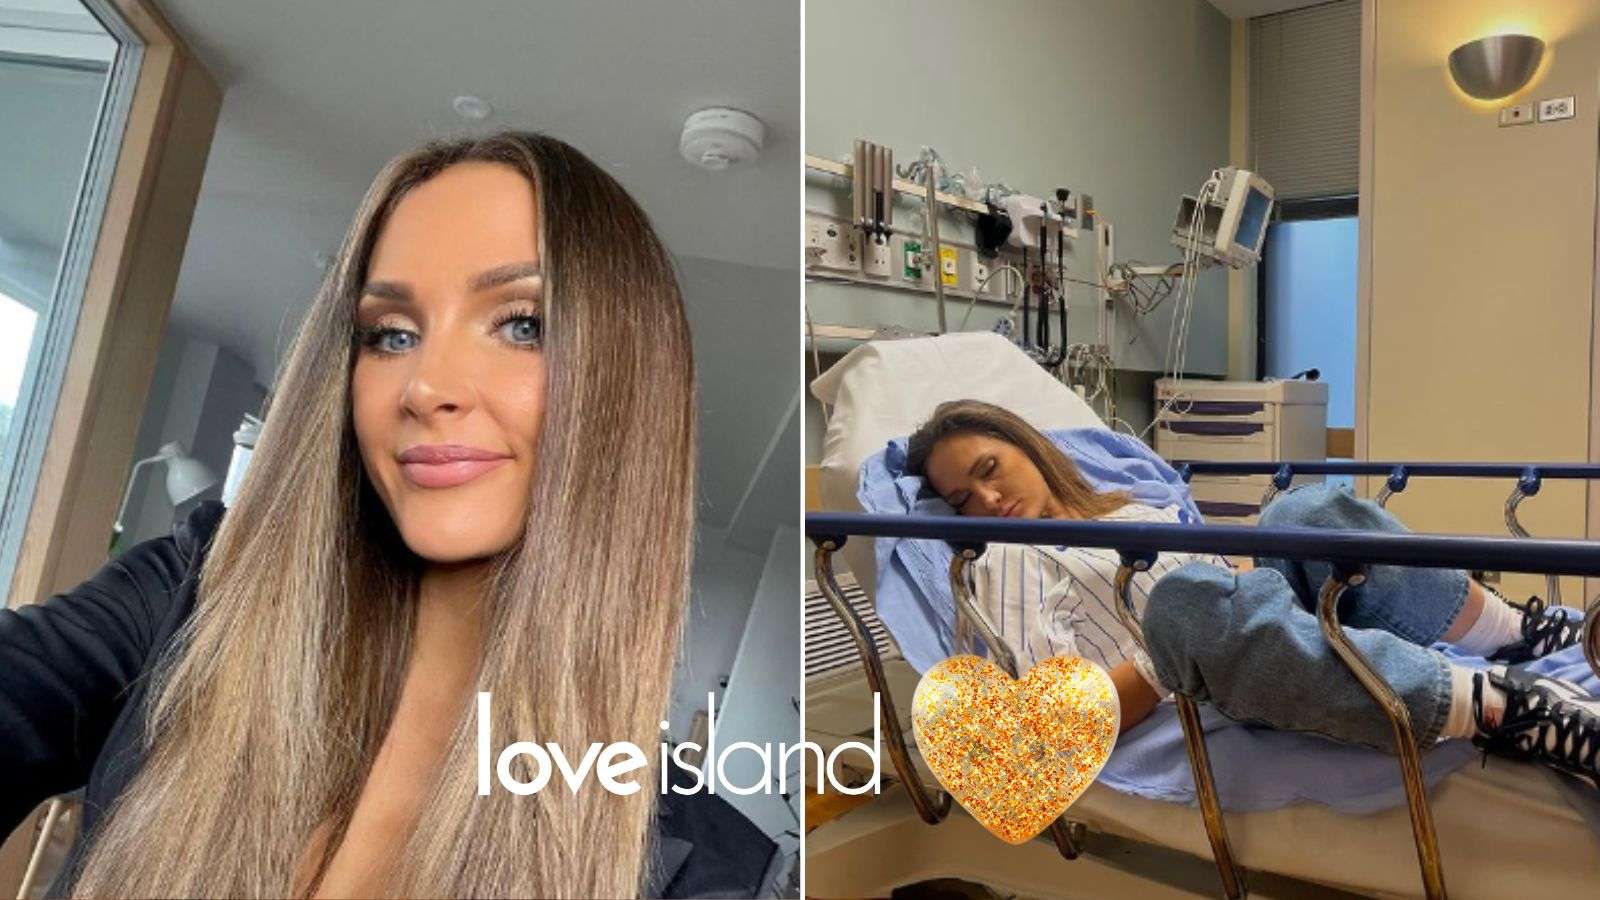 Love Island's Jessie Wynter rushed to hospital after spiked drink